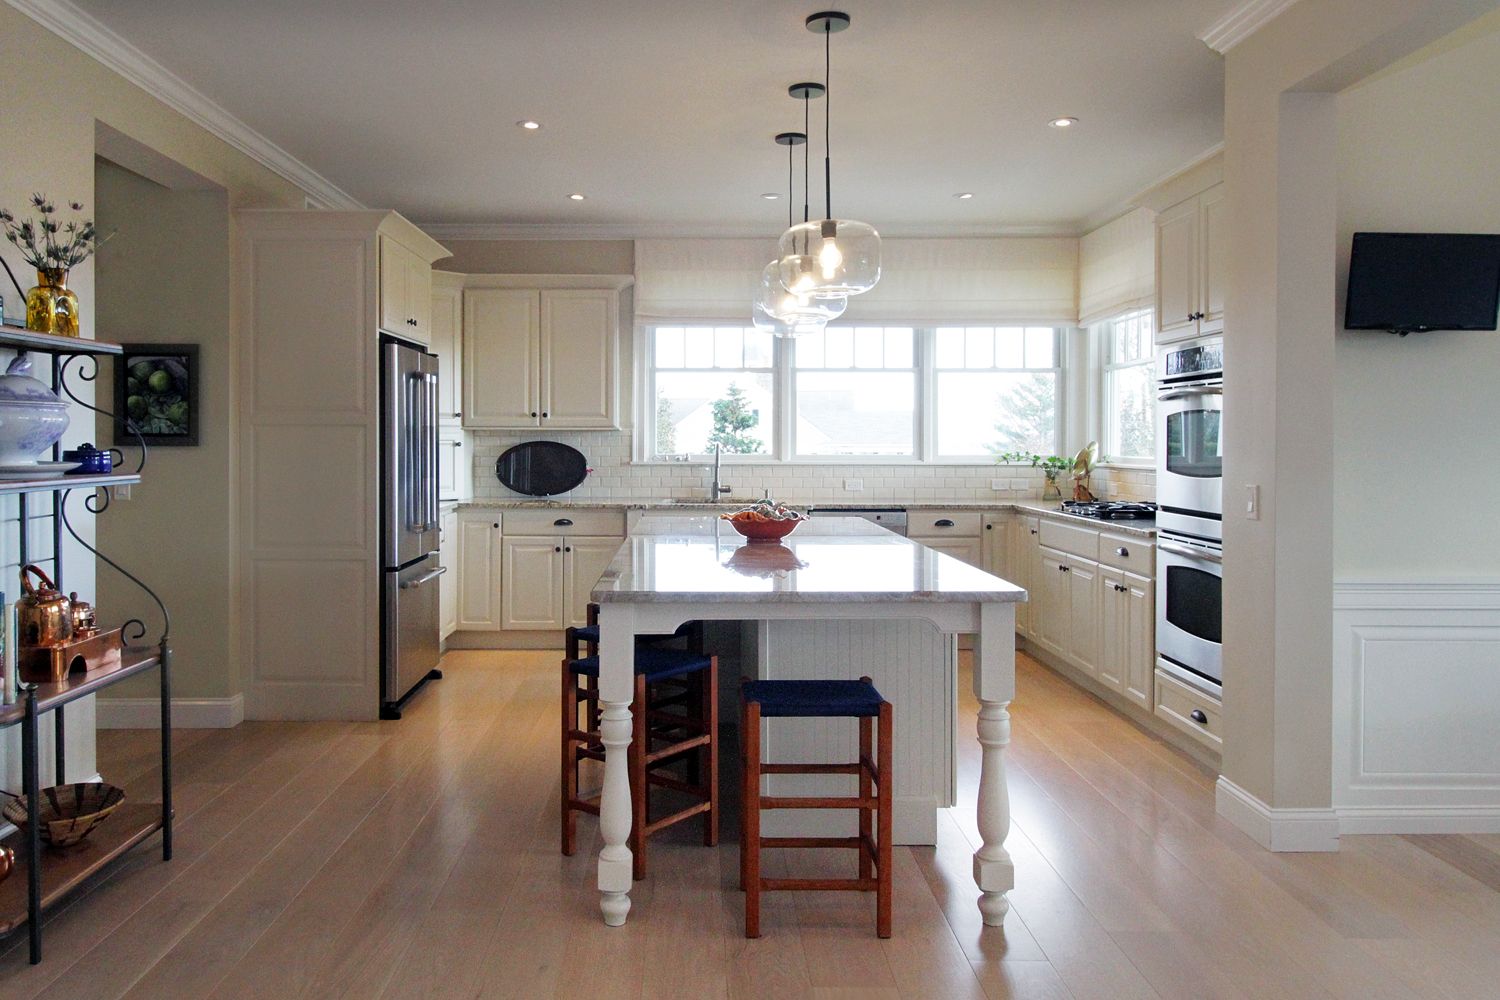 Interior kitchen lighting and electrical wiring luxury home middletown rhode island